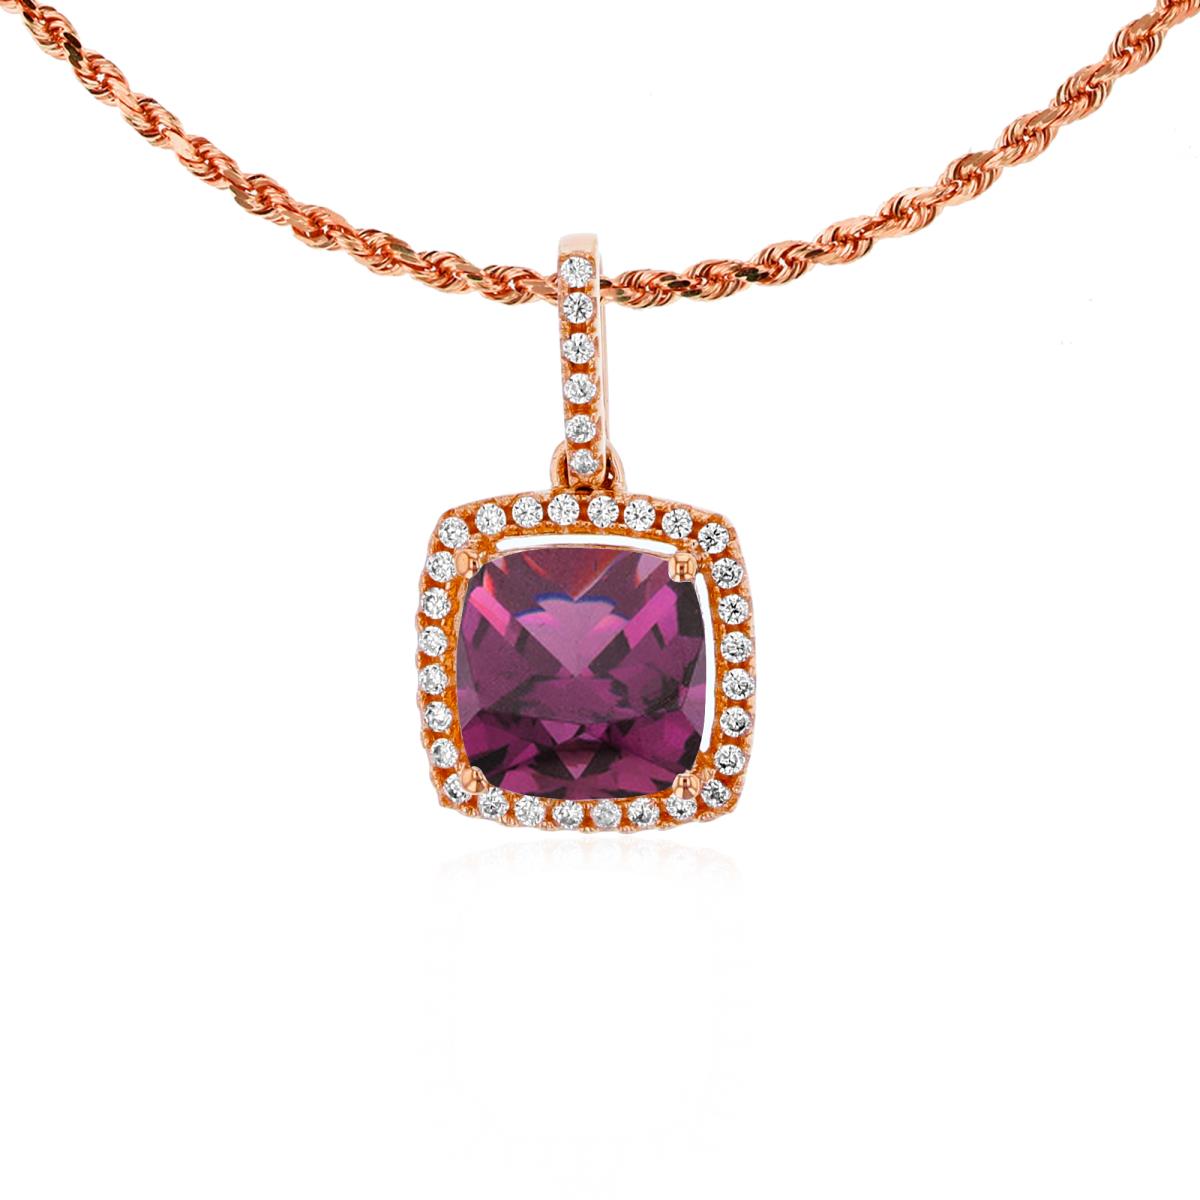 10K Rose Gold 7mm Cushion Rhodolite & 0.14 CTTW Rnd Diamond Halo 18" Rope Chain Necklace